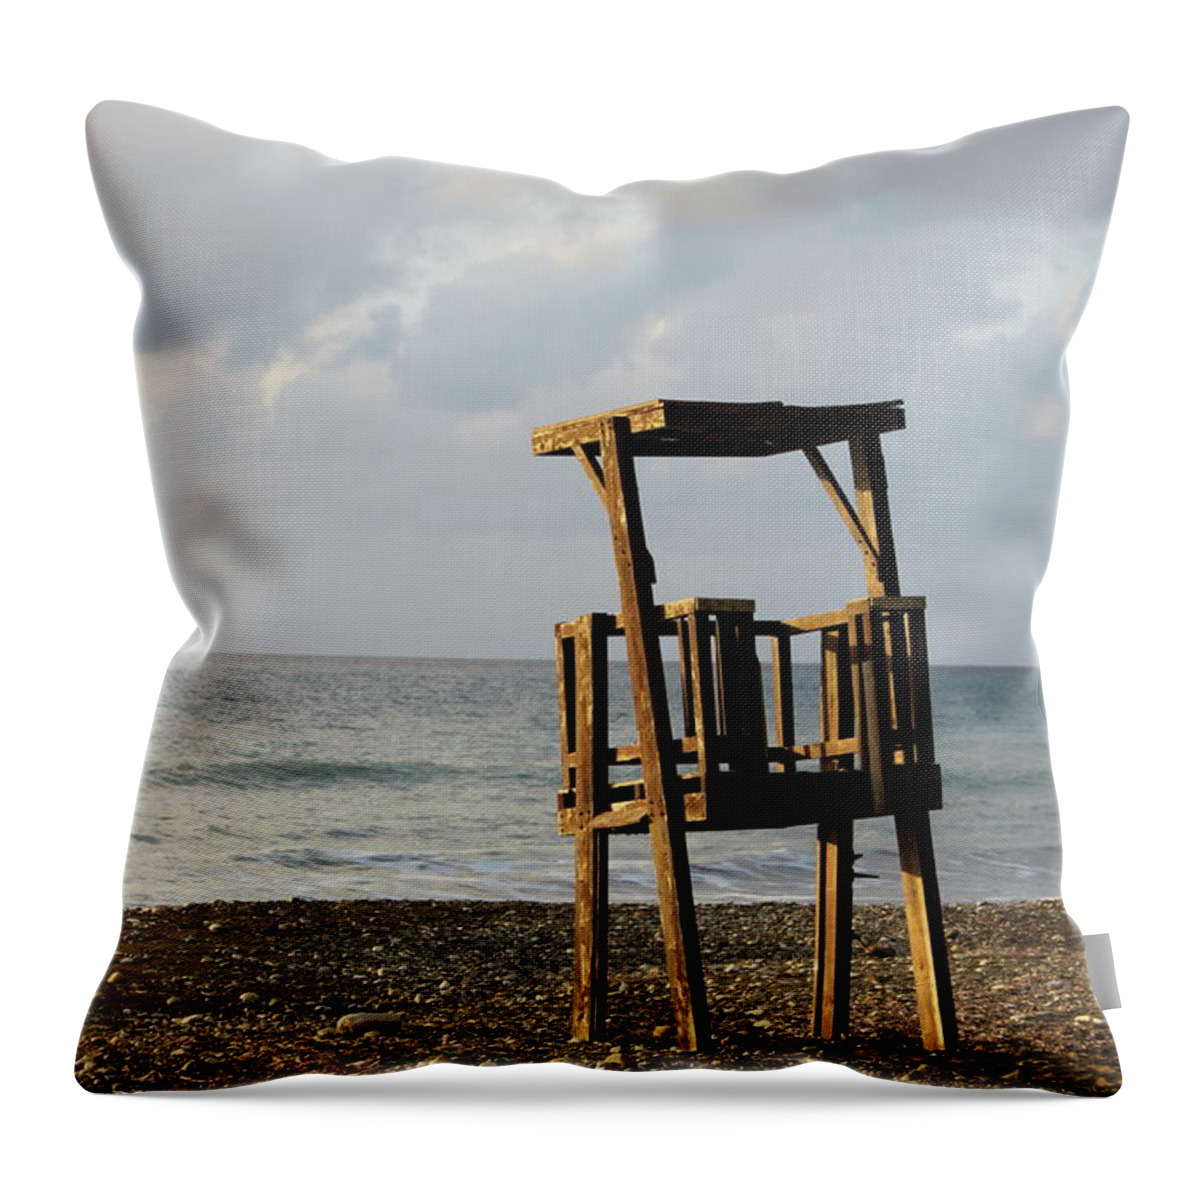 Tranquility Throw Pillow featuring the photograph Lifeguard Stand, Polis Beach by Taylor Mcconnell